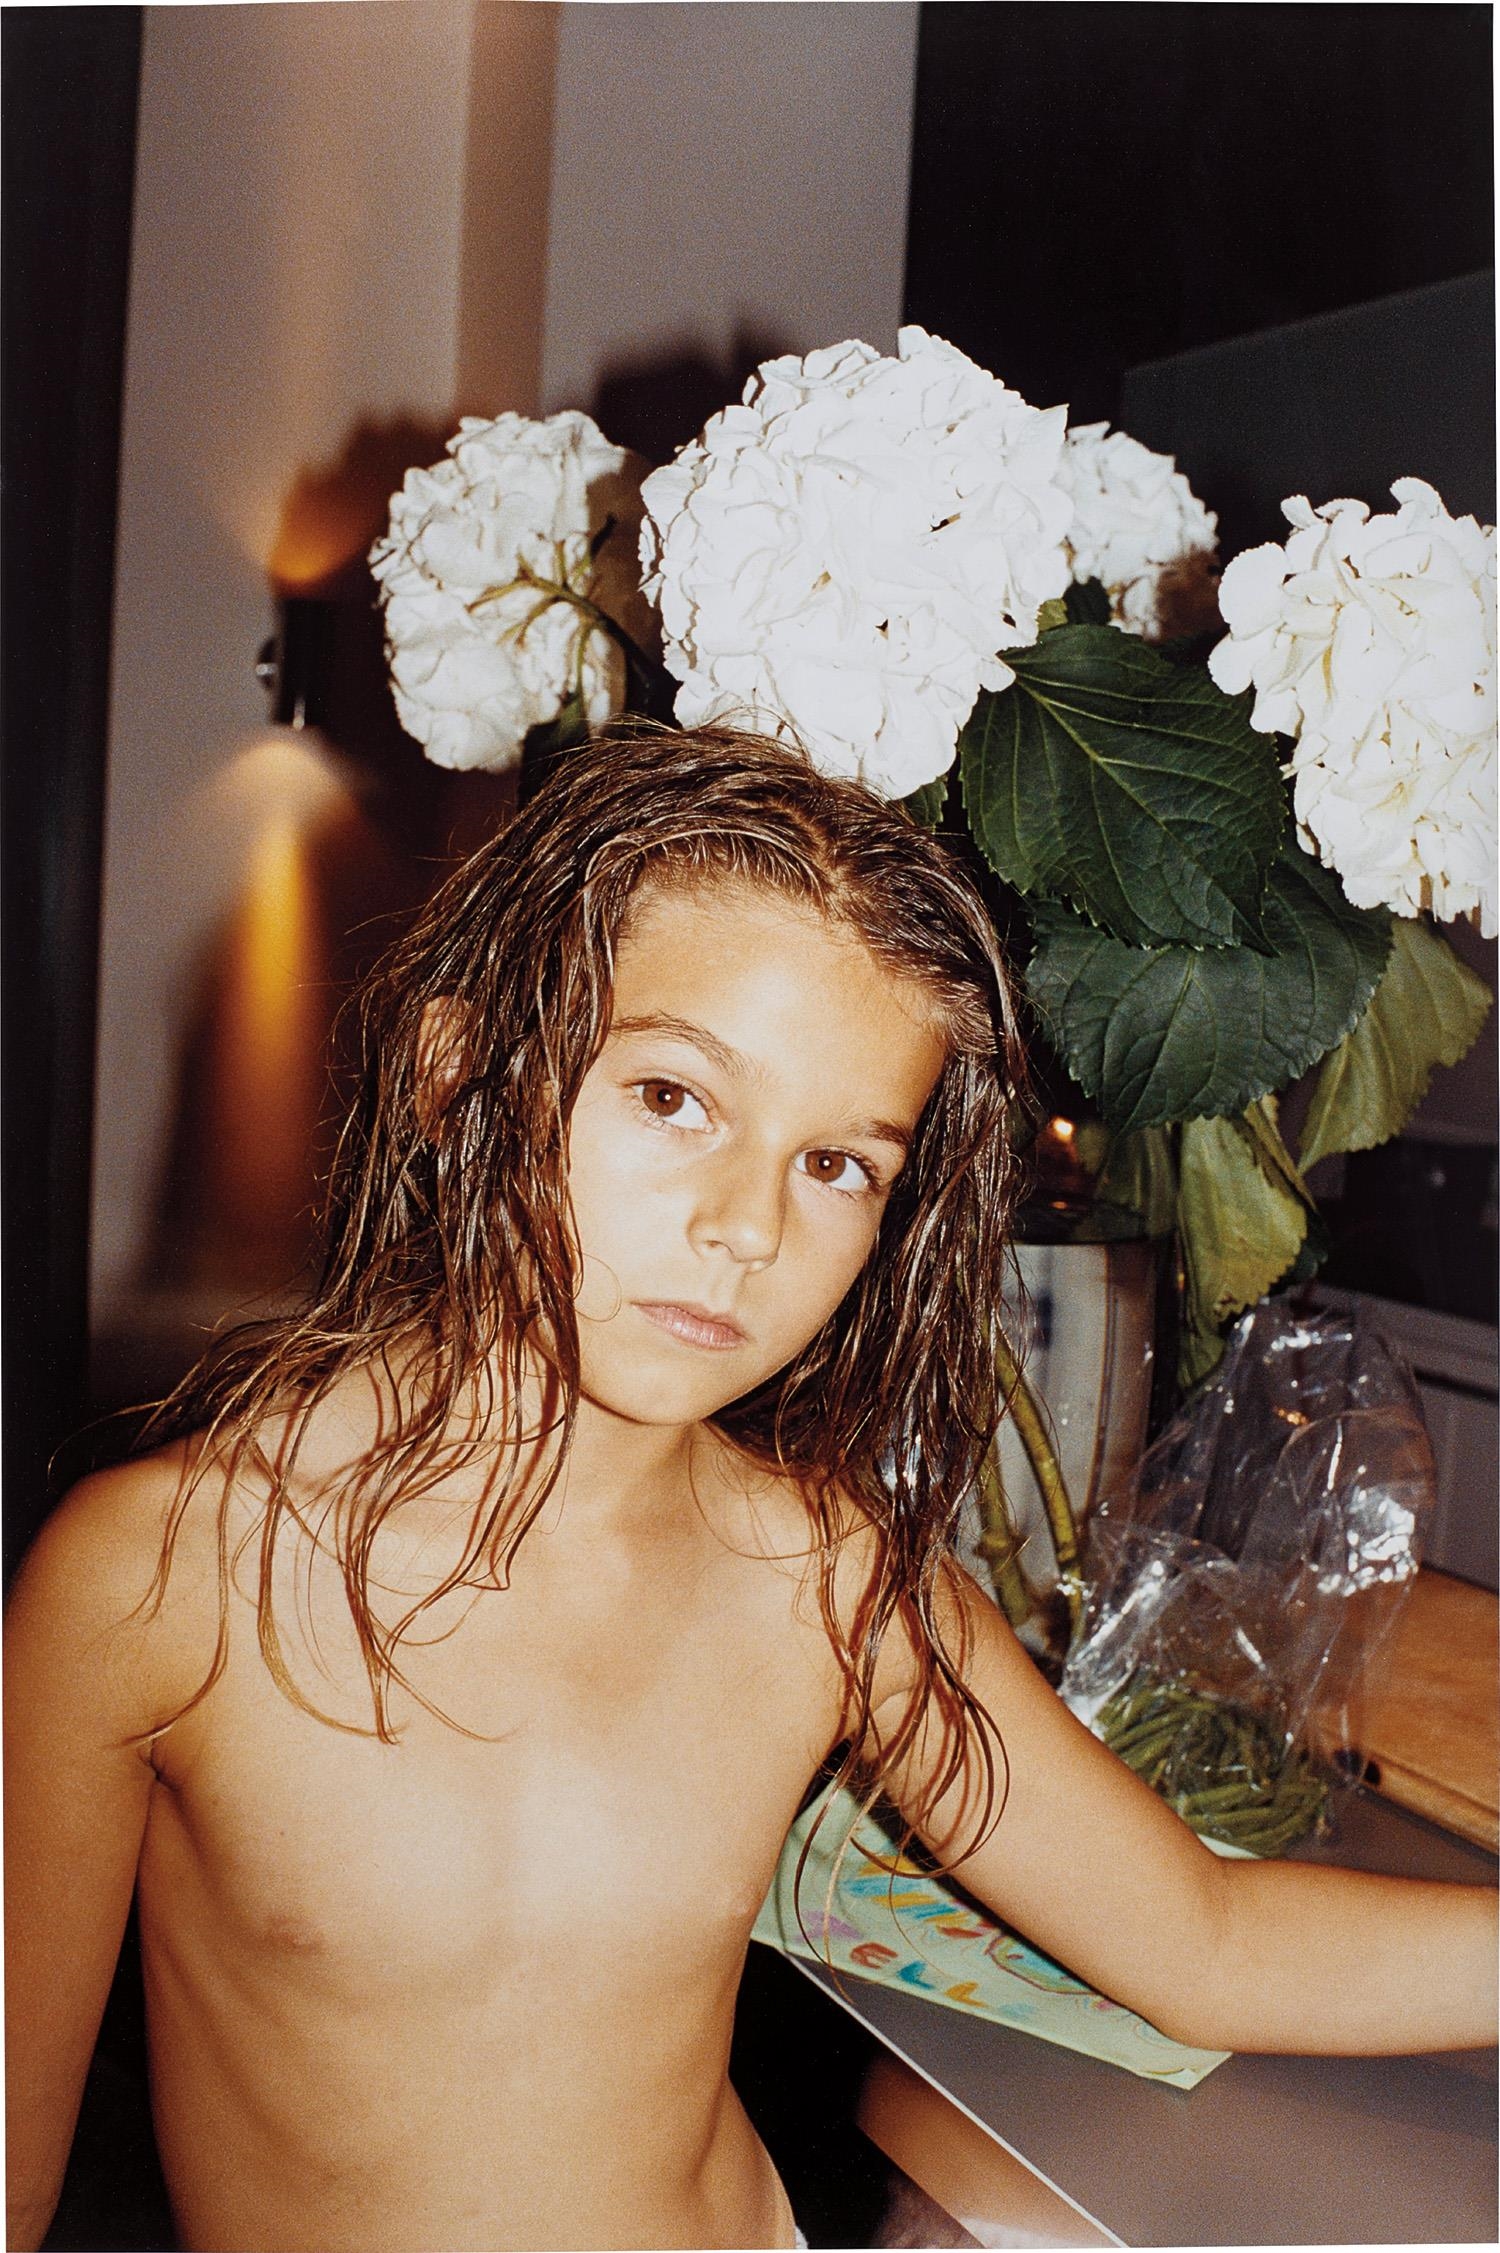 Lola with Nits by Juergen Teller, 2005